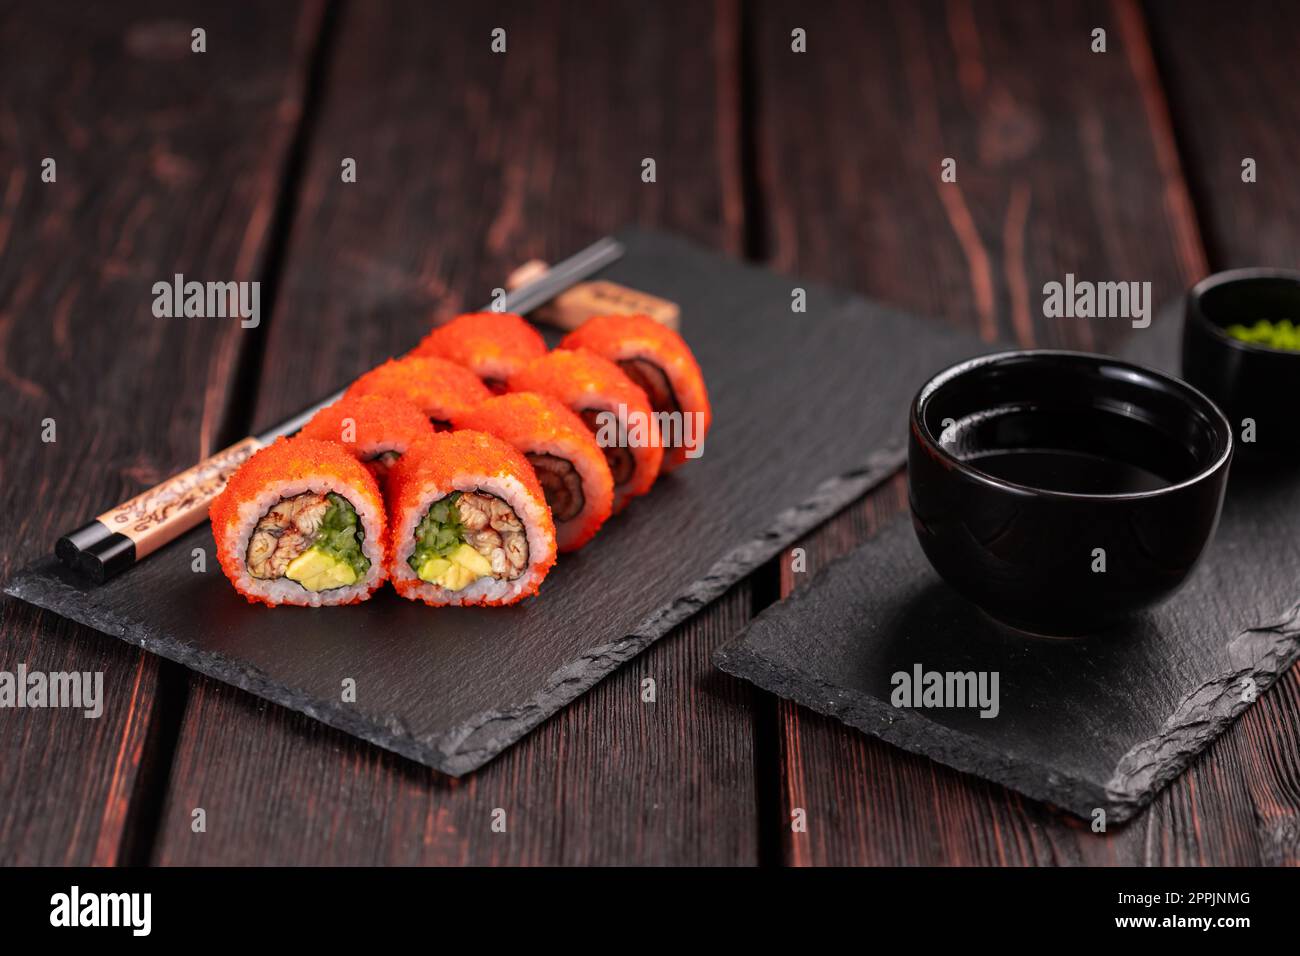 https://c8.alamy.com/comp/2PPJNMG/california-sushi-roll-with-eel-cucumber-and-tobiko-caviar-served-on-black-board-close-up-japanese-food-2PPJNMG.jpg